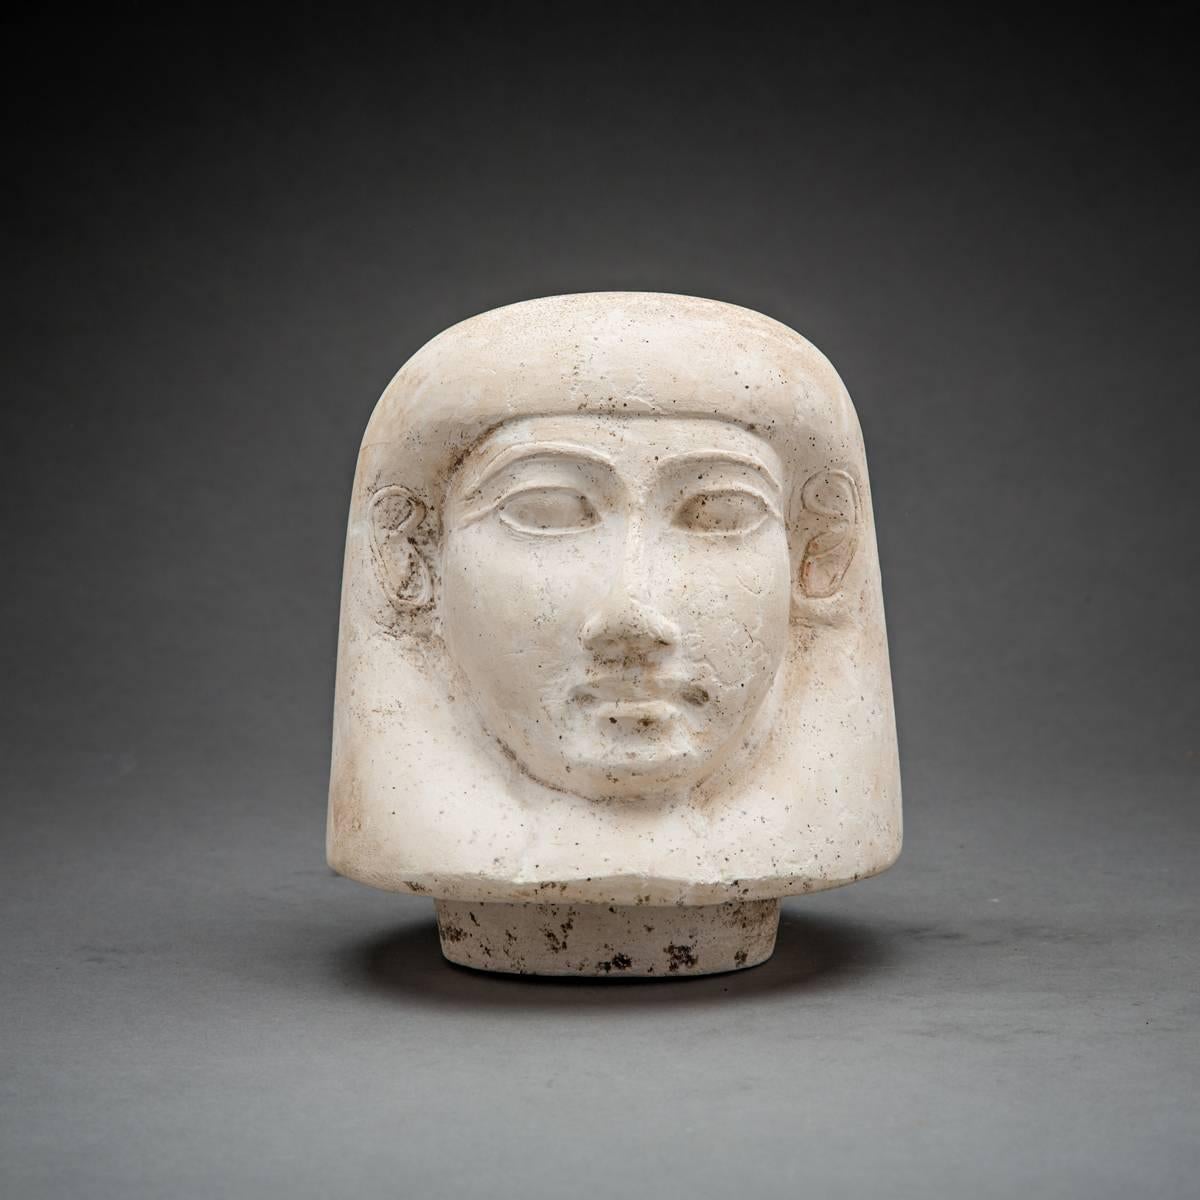 The treatment of this head as an independent unit with a circular, recessed projection on its under side suggests its use as a lid on a Canopic jar. The features of its cordiform-shaped face are idealing and are dominated by